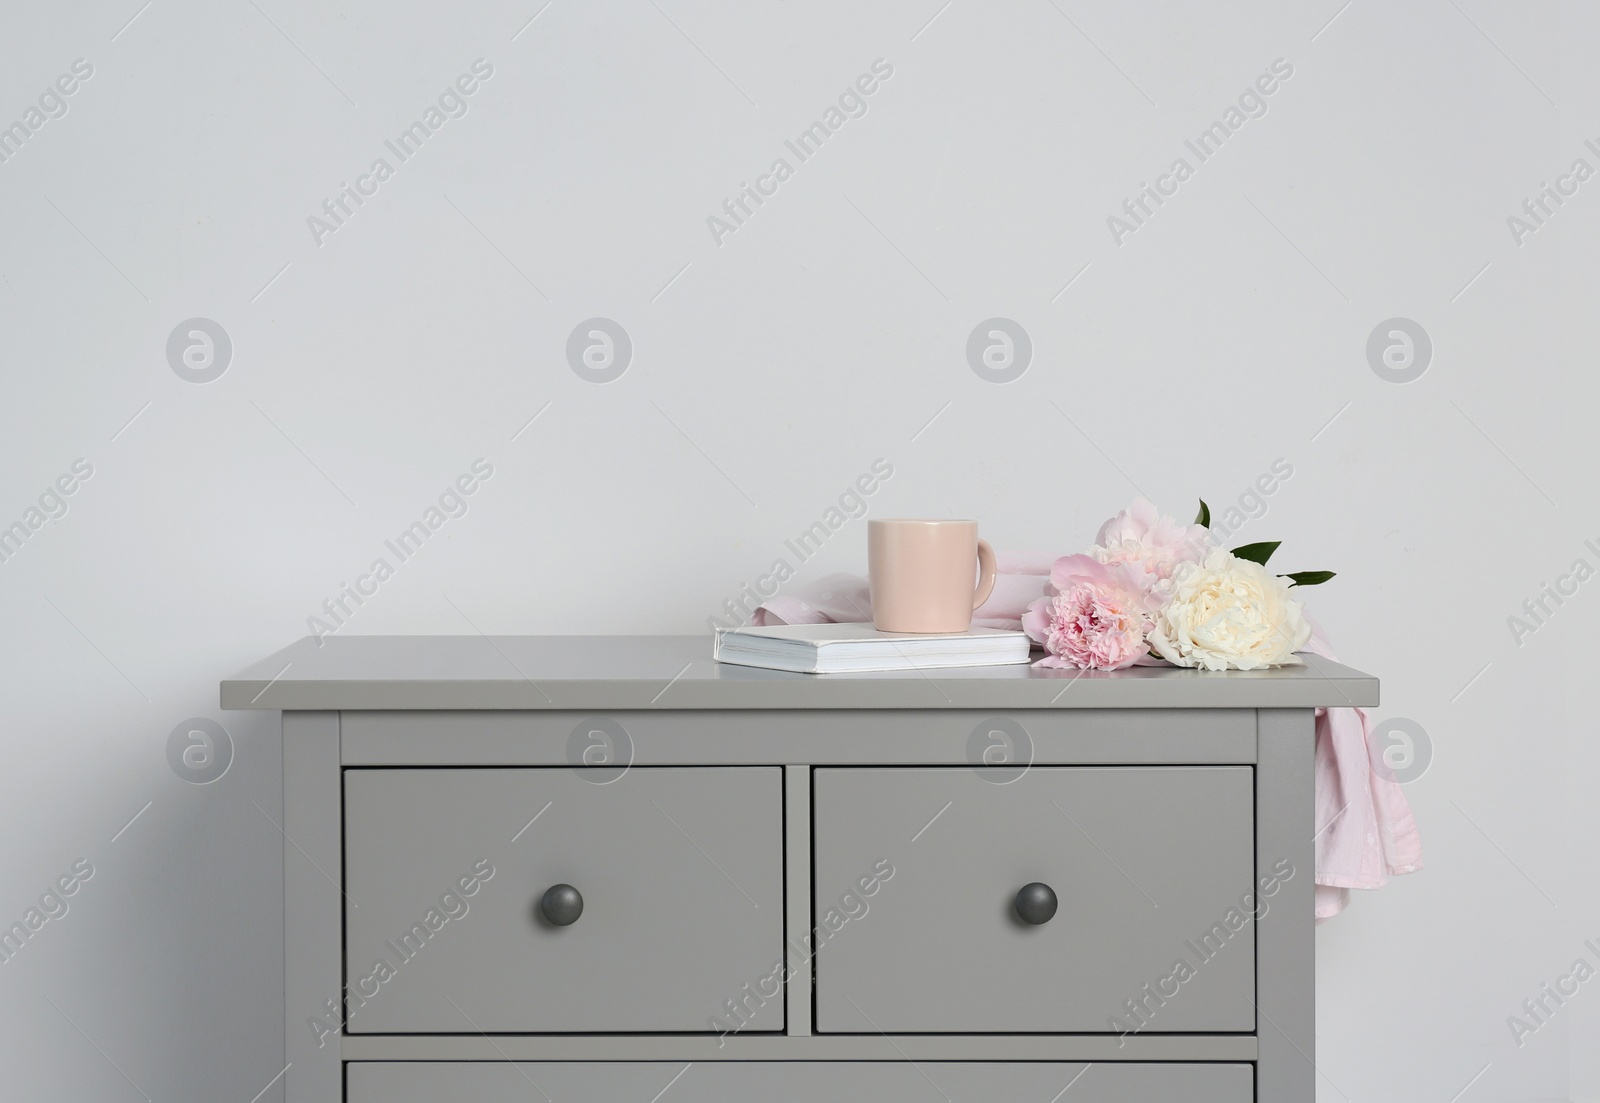 Photo of Grey chest of drawers on light background